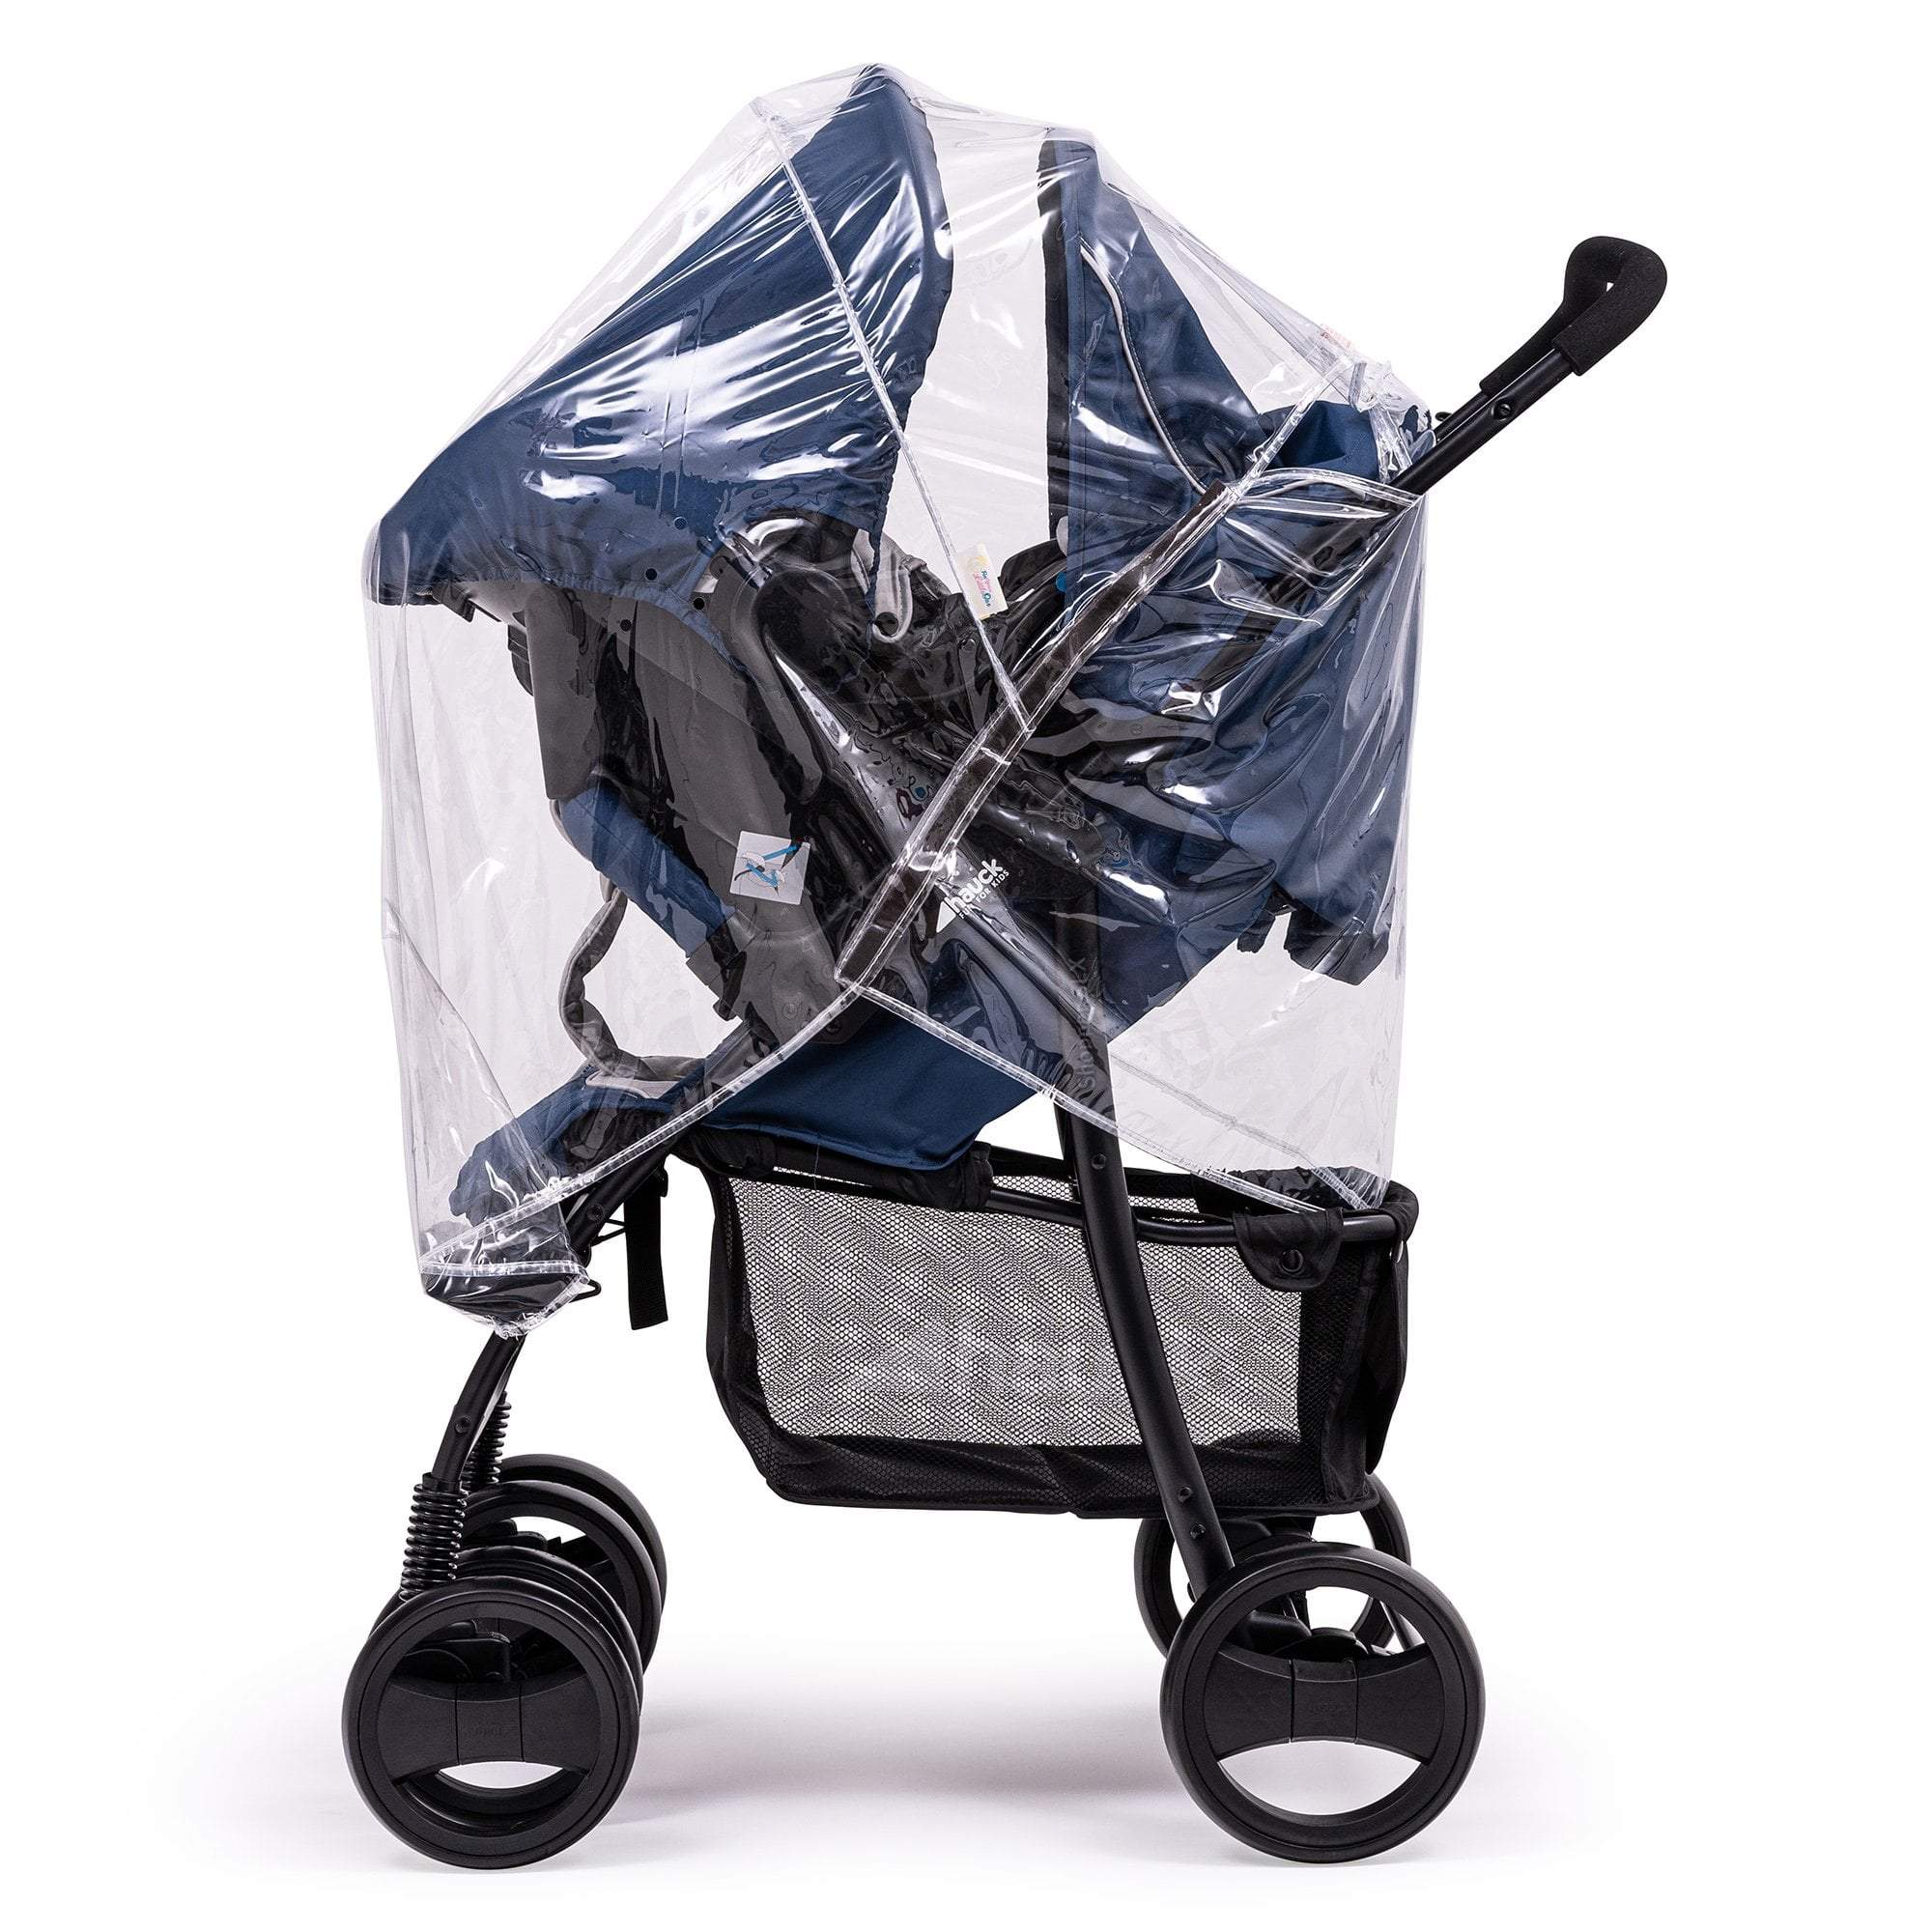 Travel System Raincover Compatible with Tippitoes - Fits All Models - For Your Little One